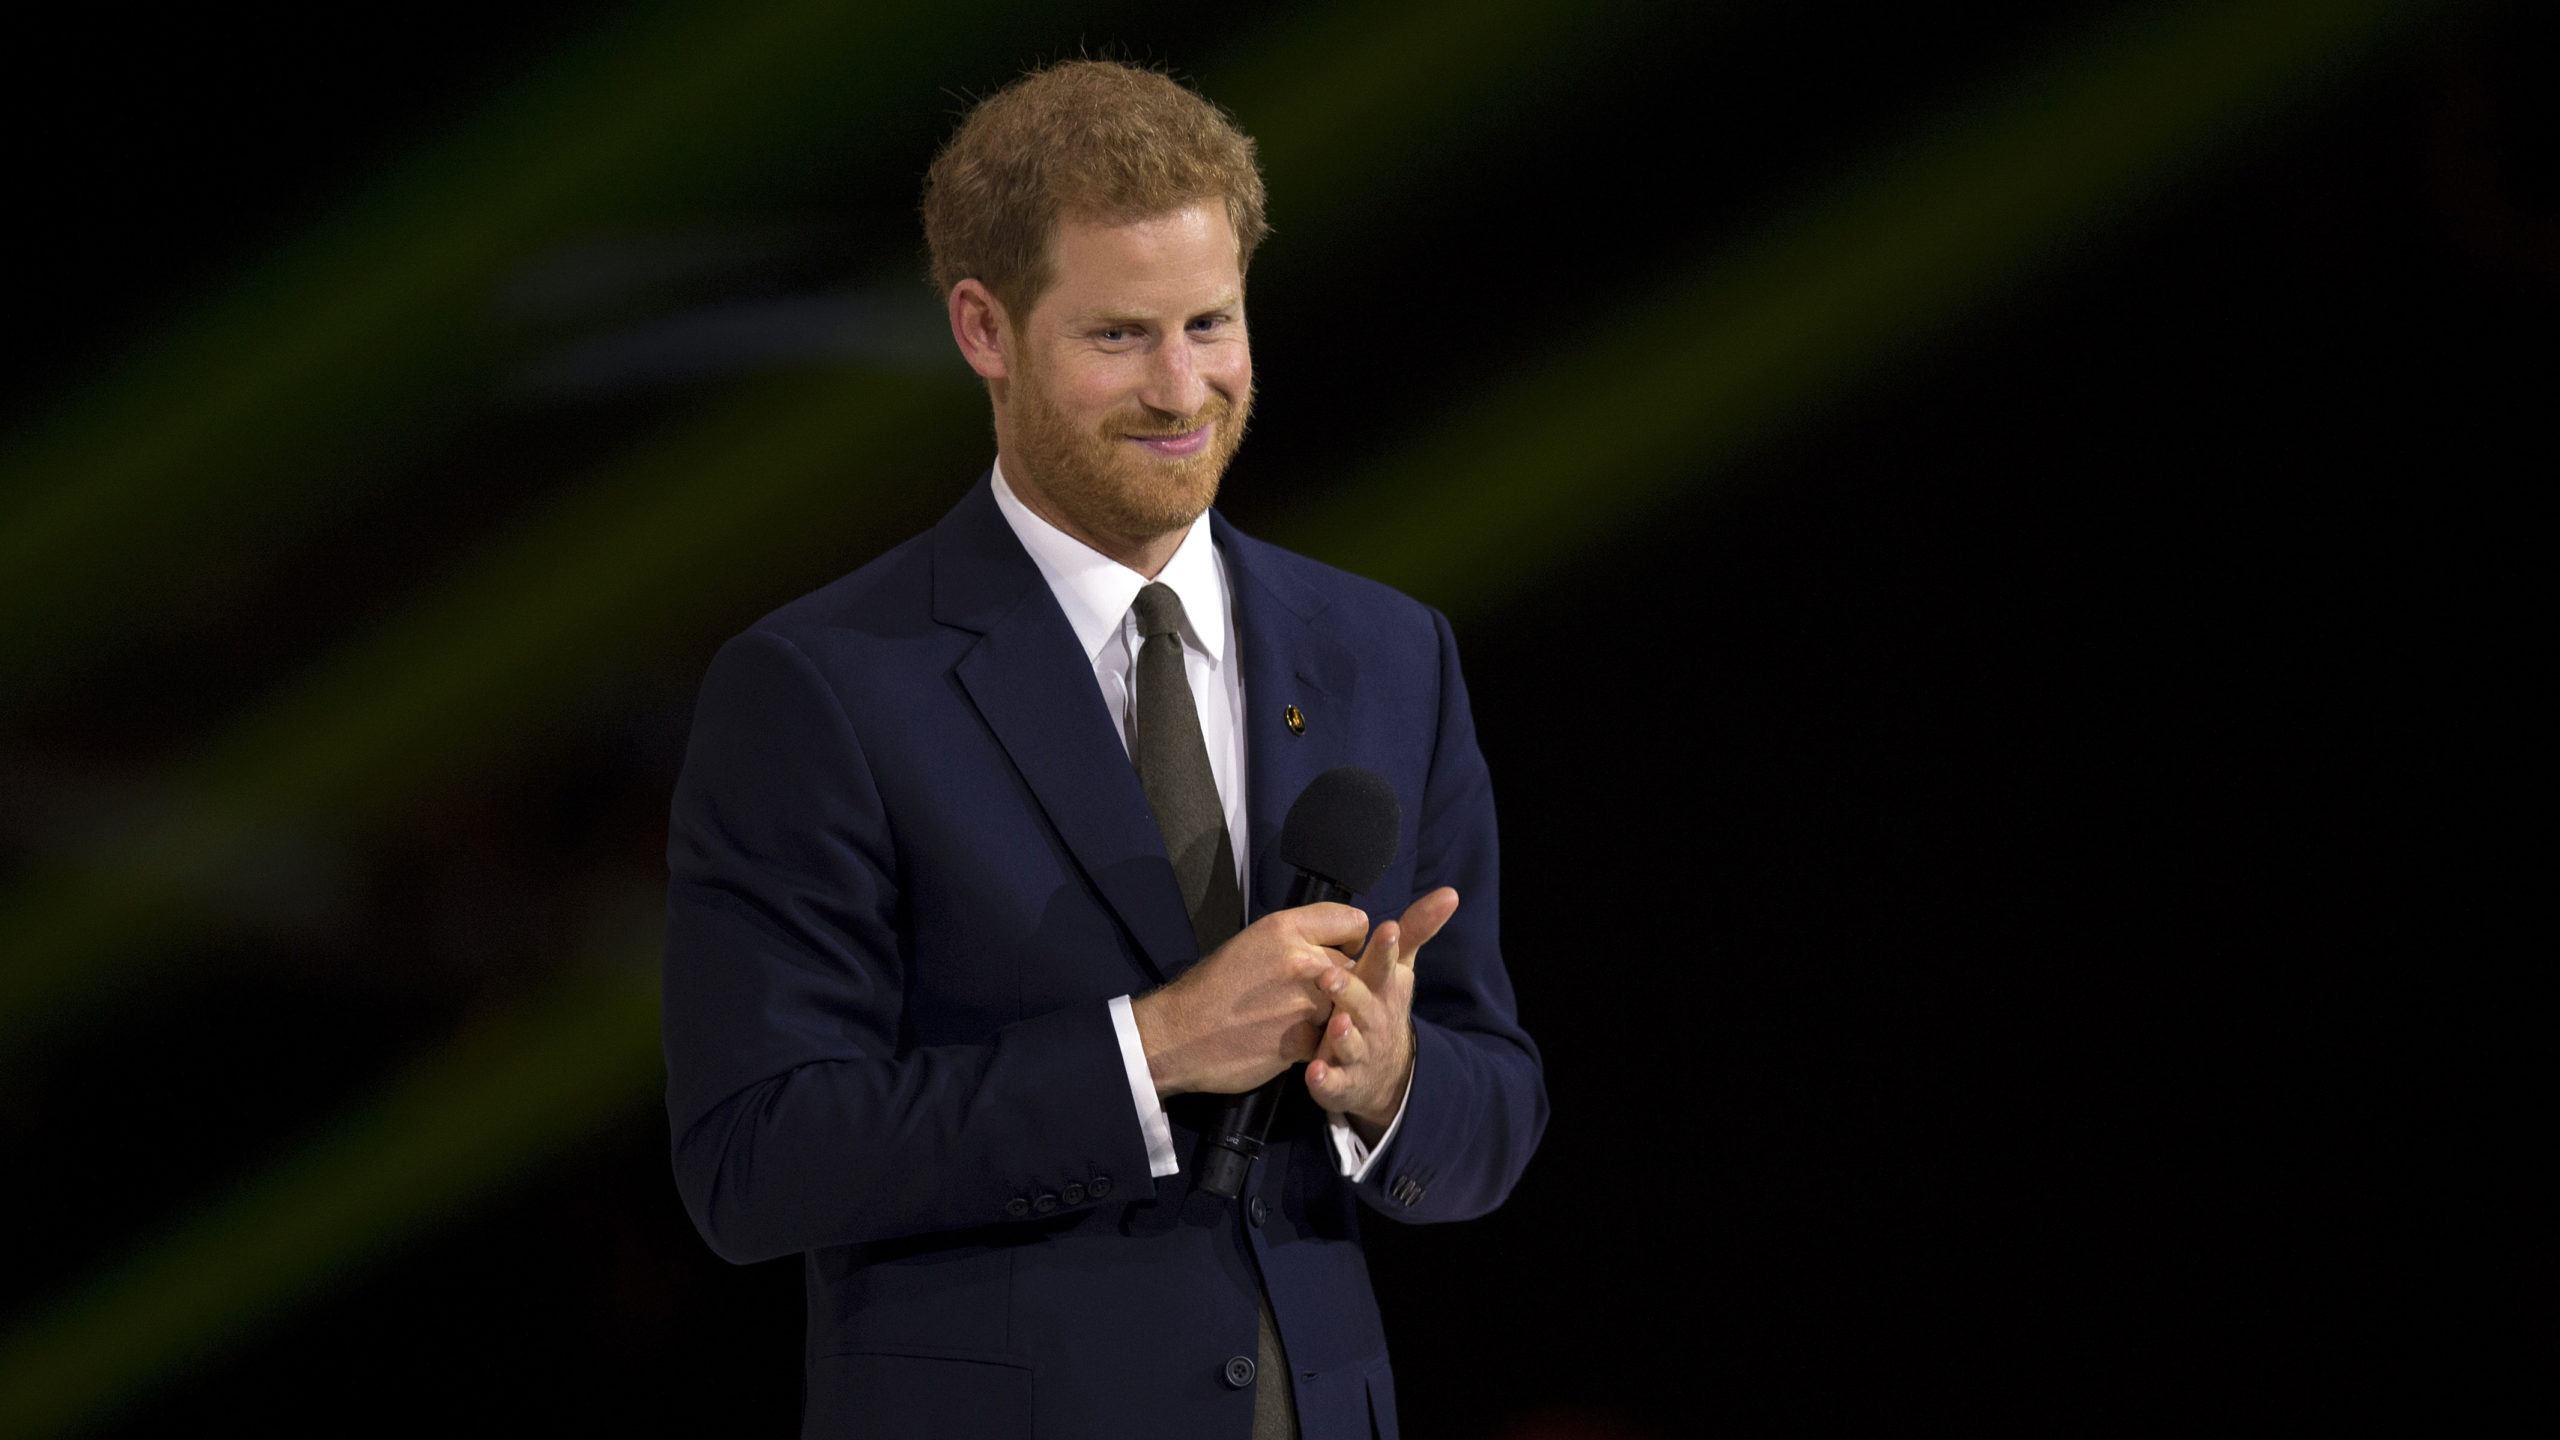 United Kingdom’s Prince Harry speaks during the opening ceremonies of the the2017 Invictus Games in Toronto, Canada Sept. 23, 2017. (DoD photo by EJ Hersom)